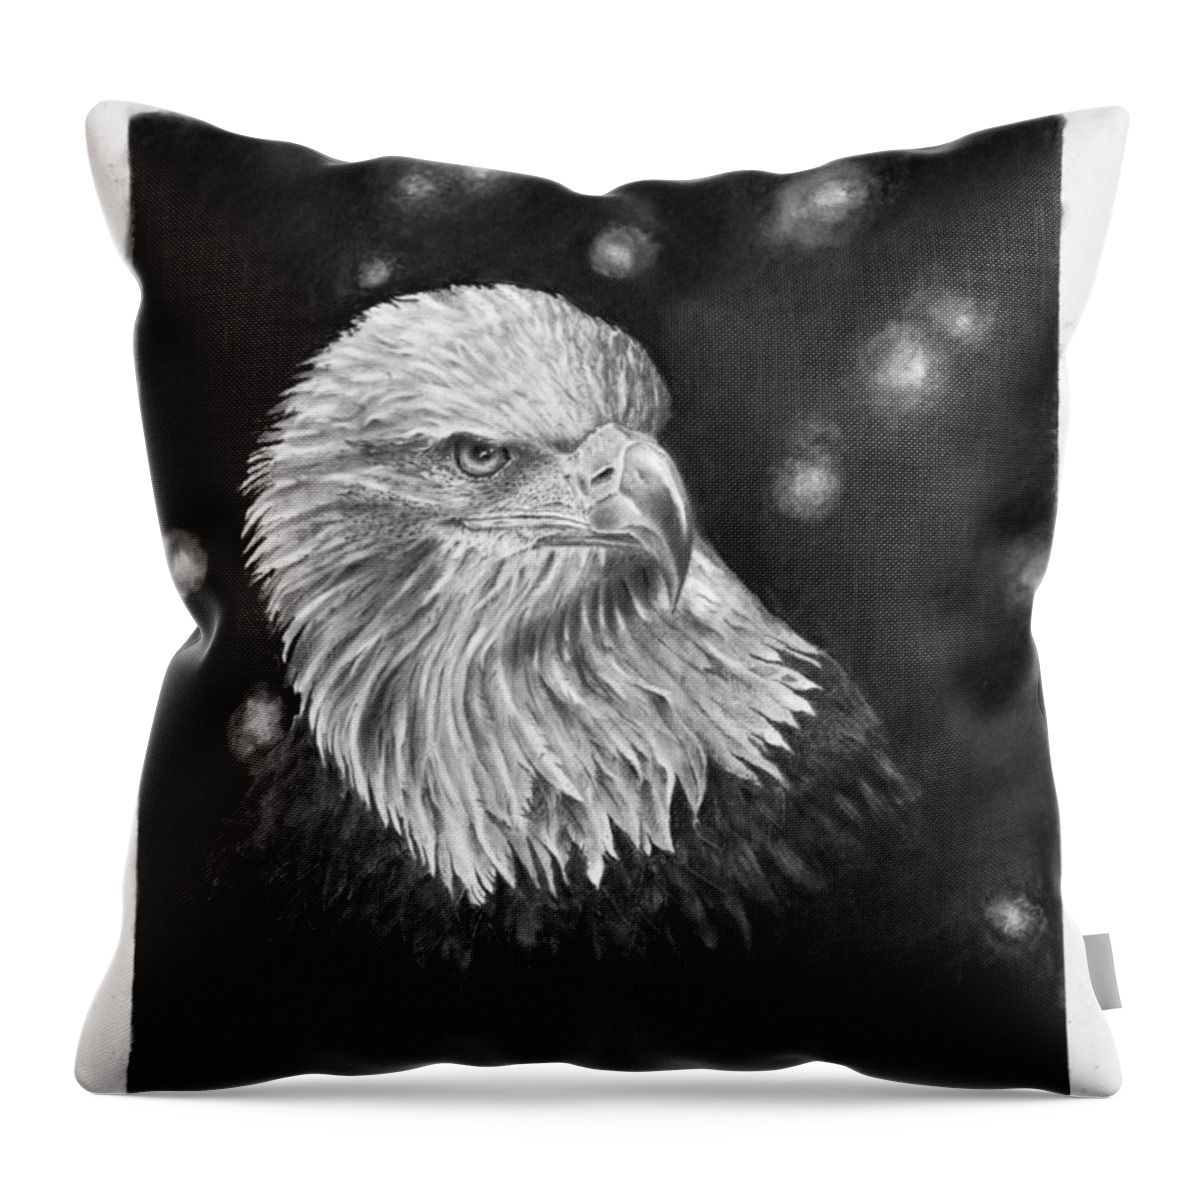 Eagle Throw Pillow featuring the drawing Commanding Gaze by Greg Fox